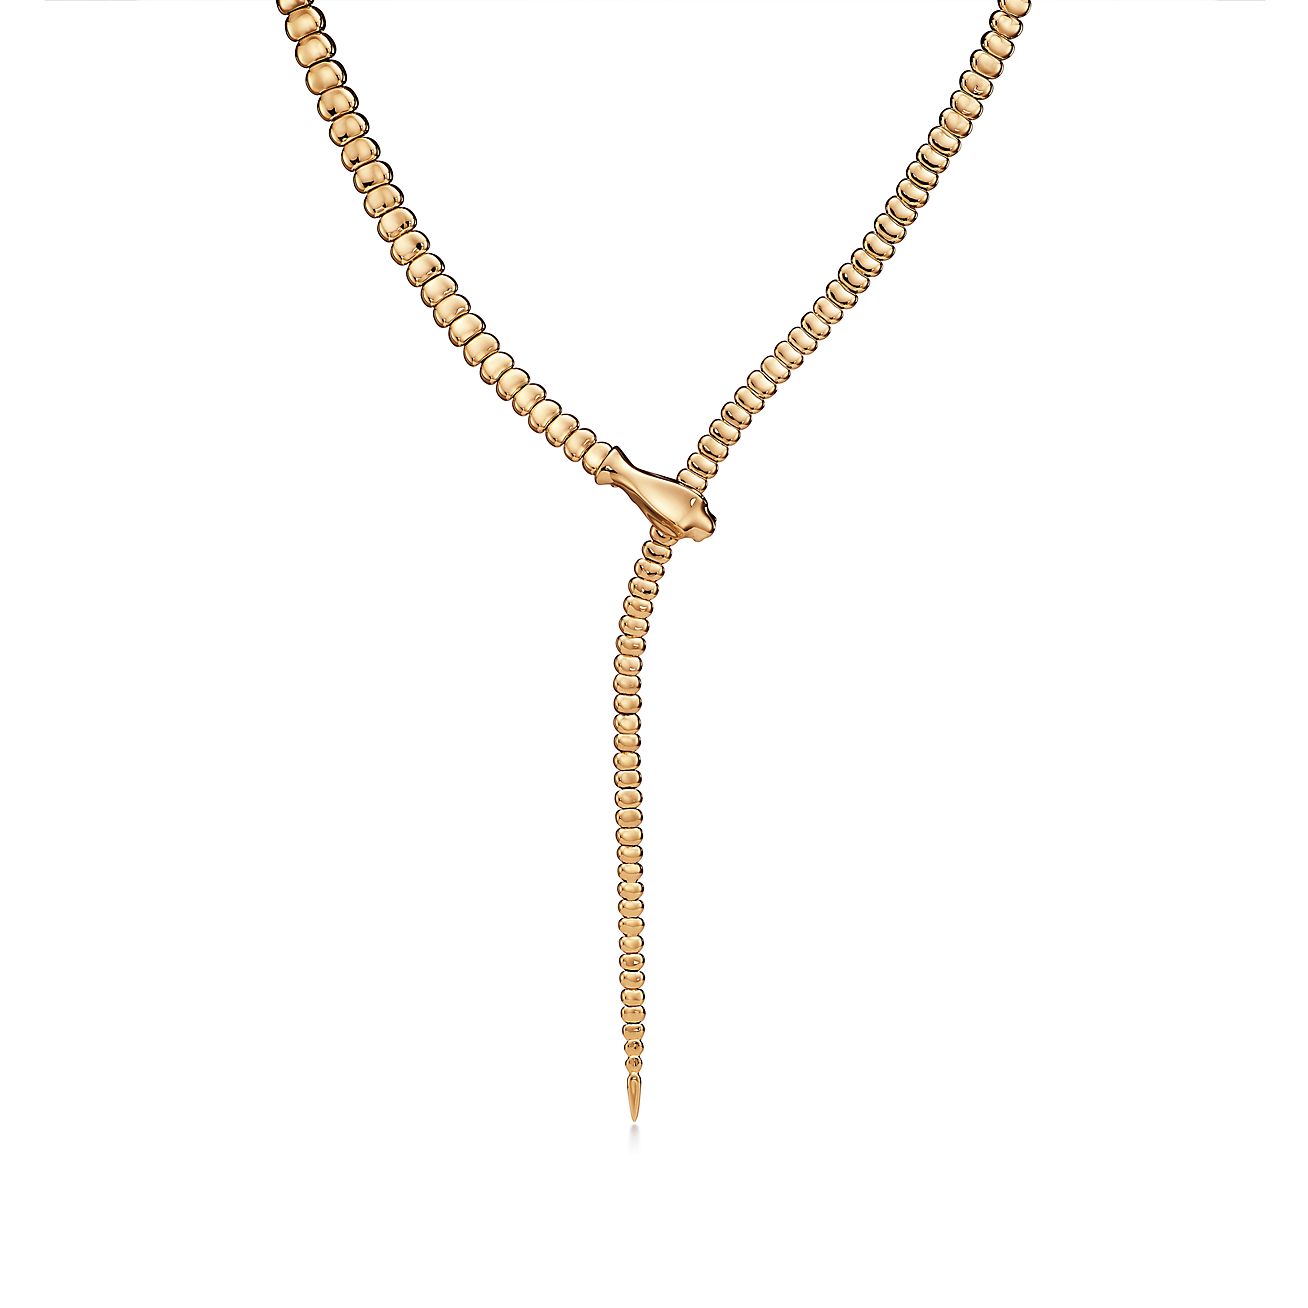 5 Gold Snake Chain Necklaces You Need In Your Jewelry Box | Classy Women  Collection